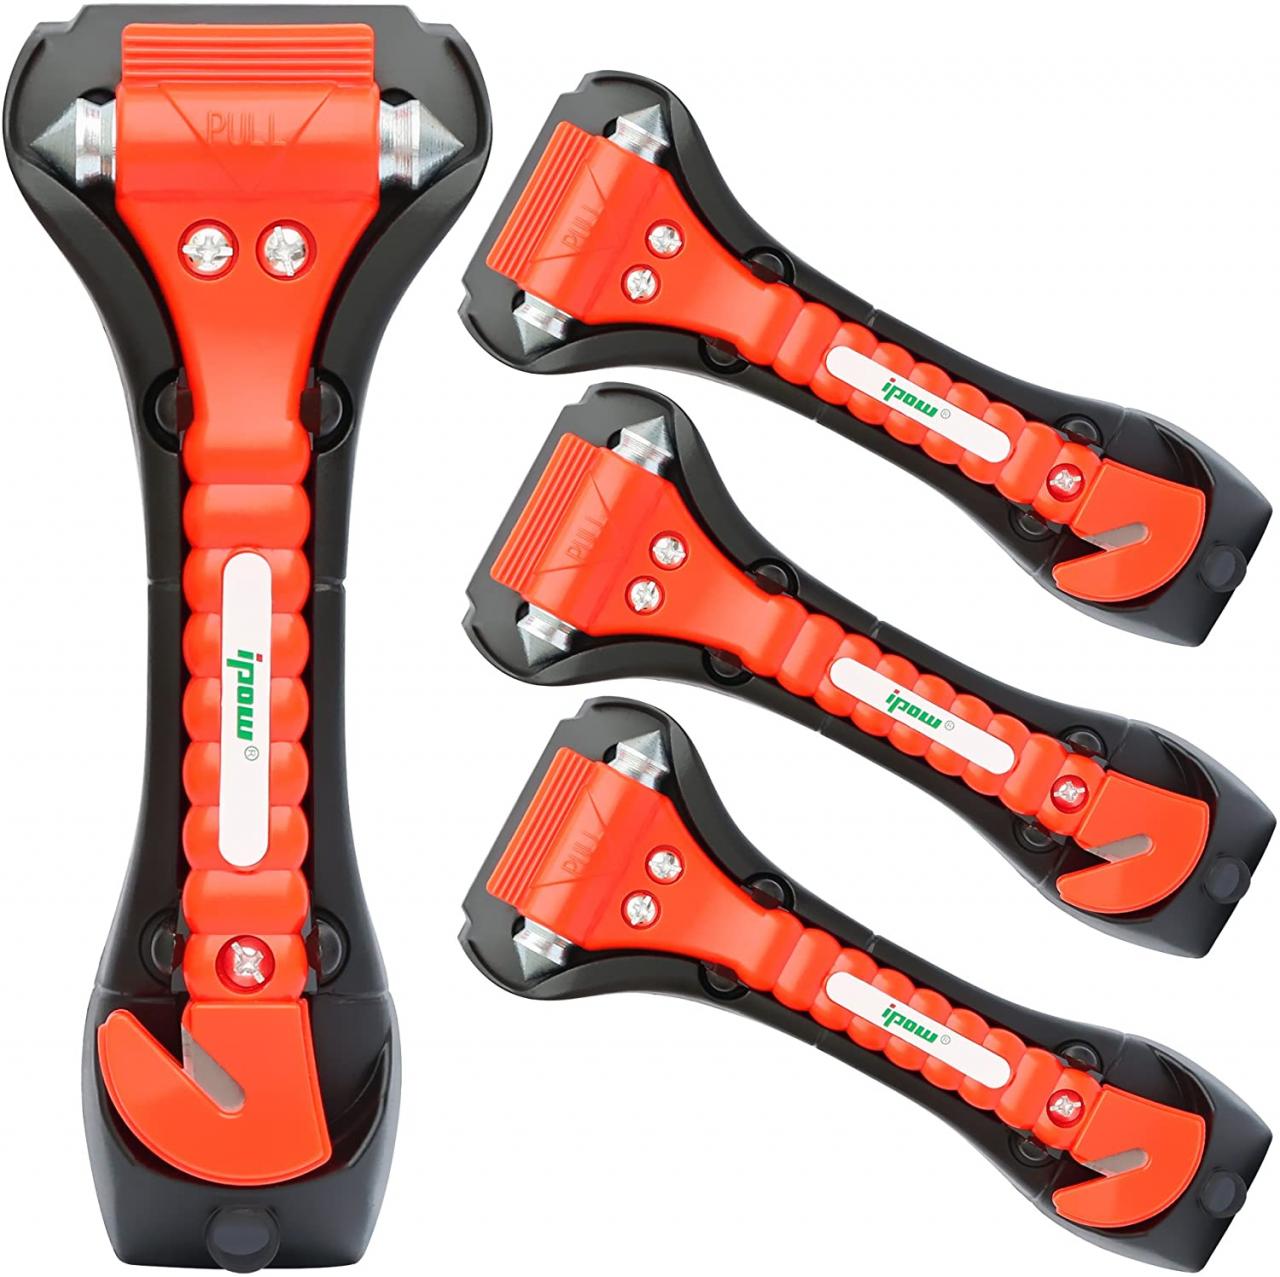 Buy 4 PCS of IPOW Car Safety Antiskid Hammer Seatbelt Cutter Emergency  Class/Window Punch Breaker Auto Rescue Disaster Escape Life-Saving Hammer  Tool,Small Online in Hong Kong. B07799RC91